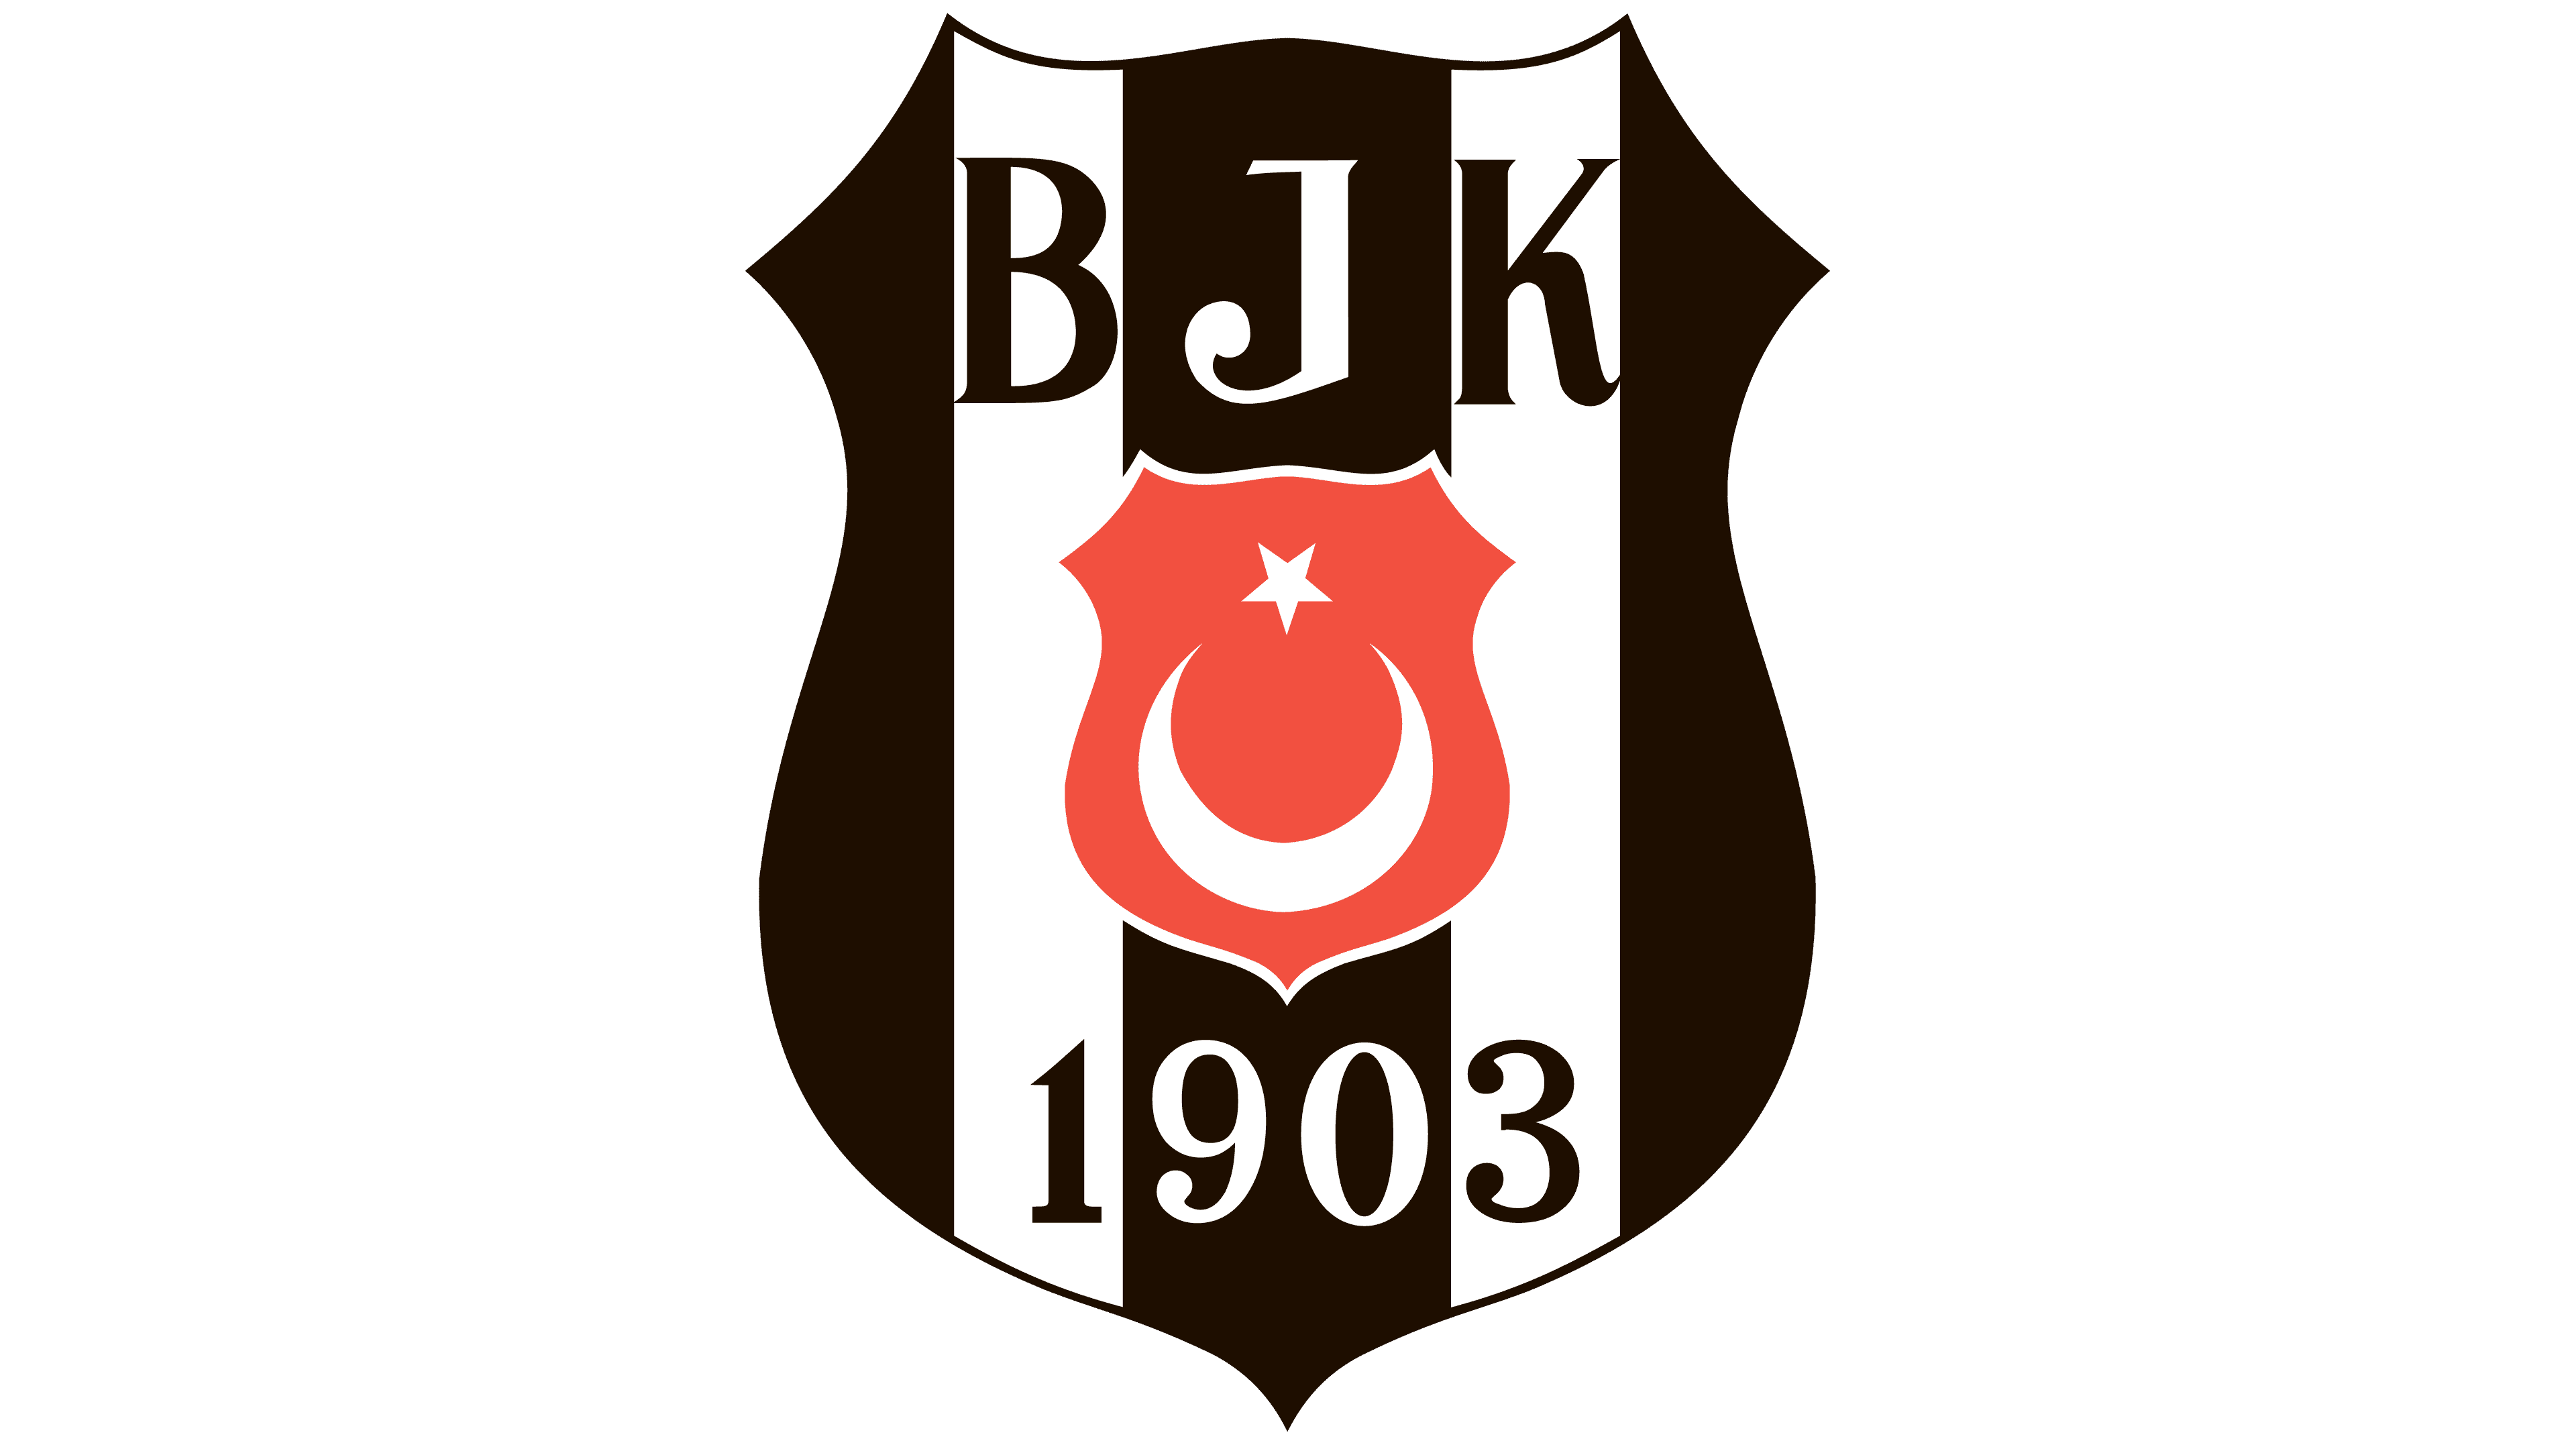 Besiktas Logo The Most Famous Brands And Company Logos In The World